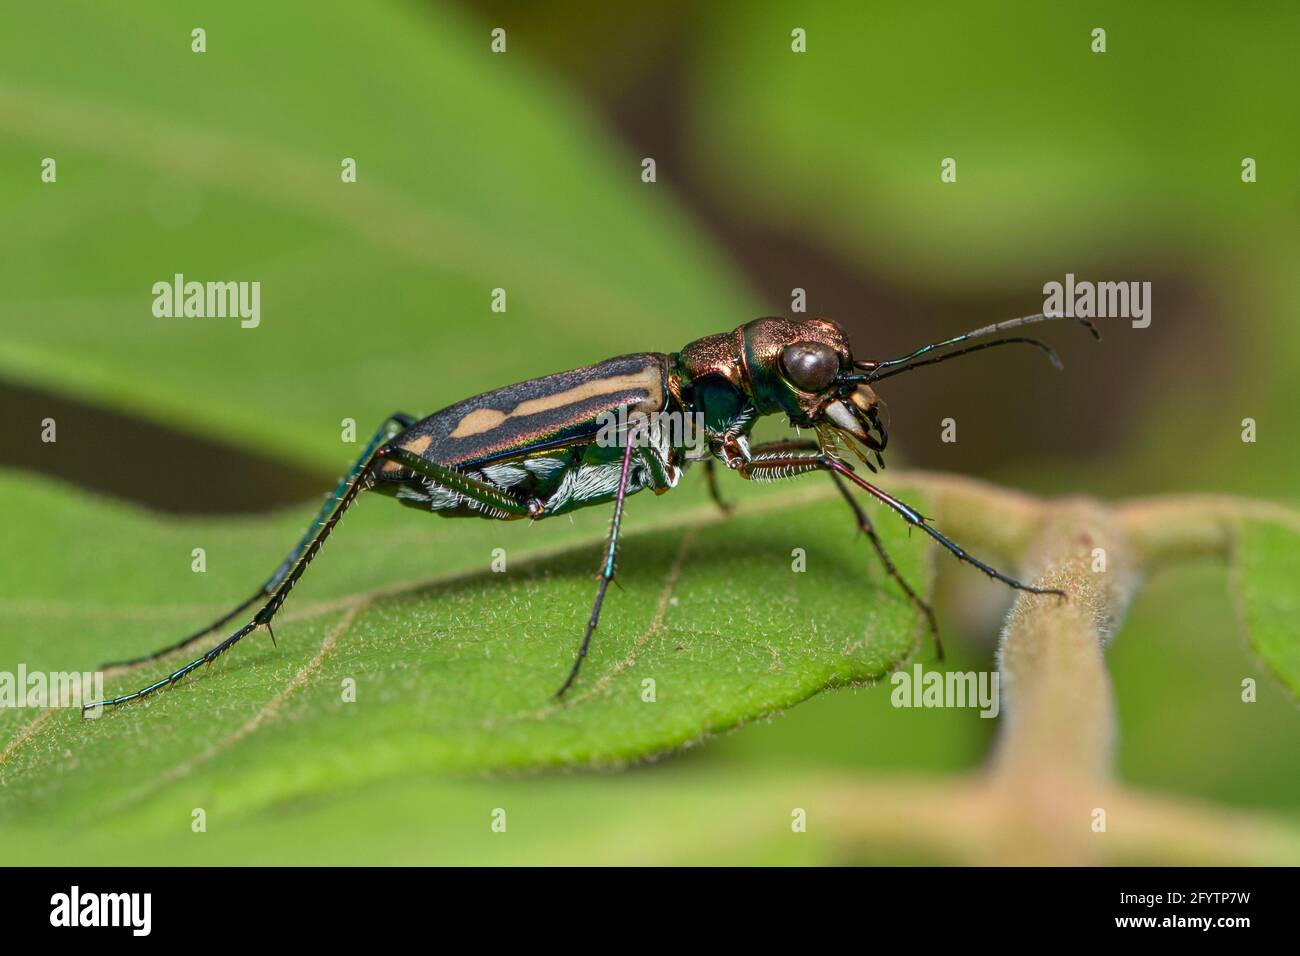 Image of tiger beetle on green leaves on natural background. Animal. Insect. Stock Photo